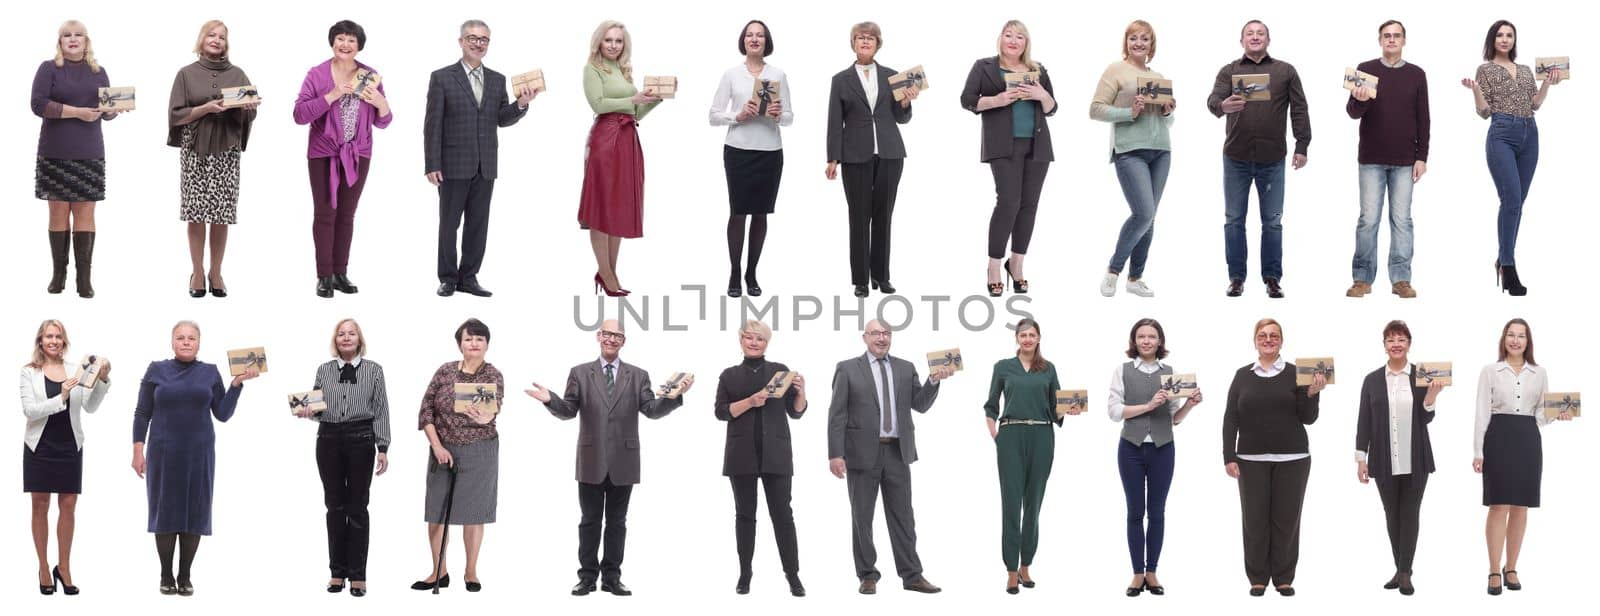 group of happy people with gifts in their hands isolated on white background